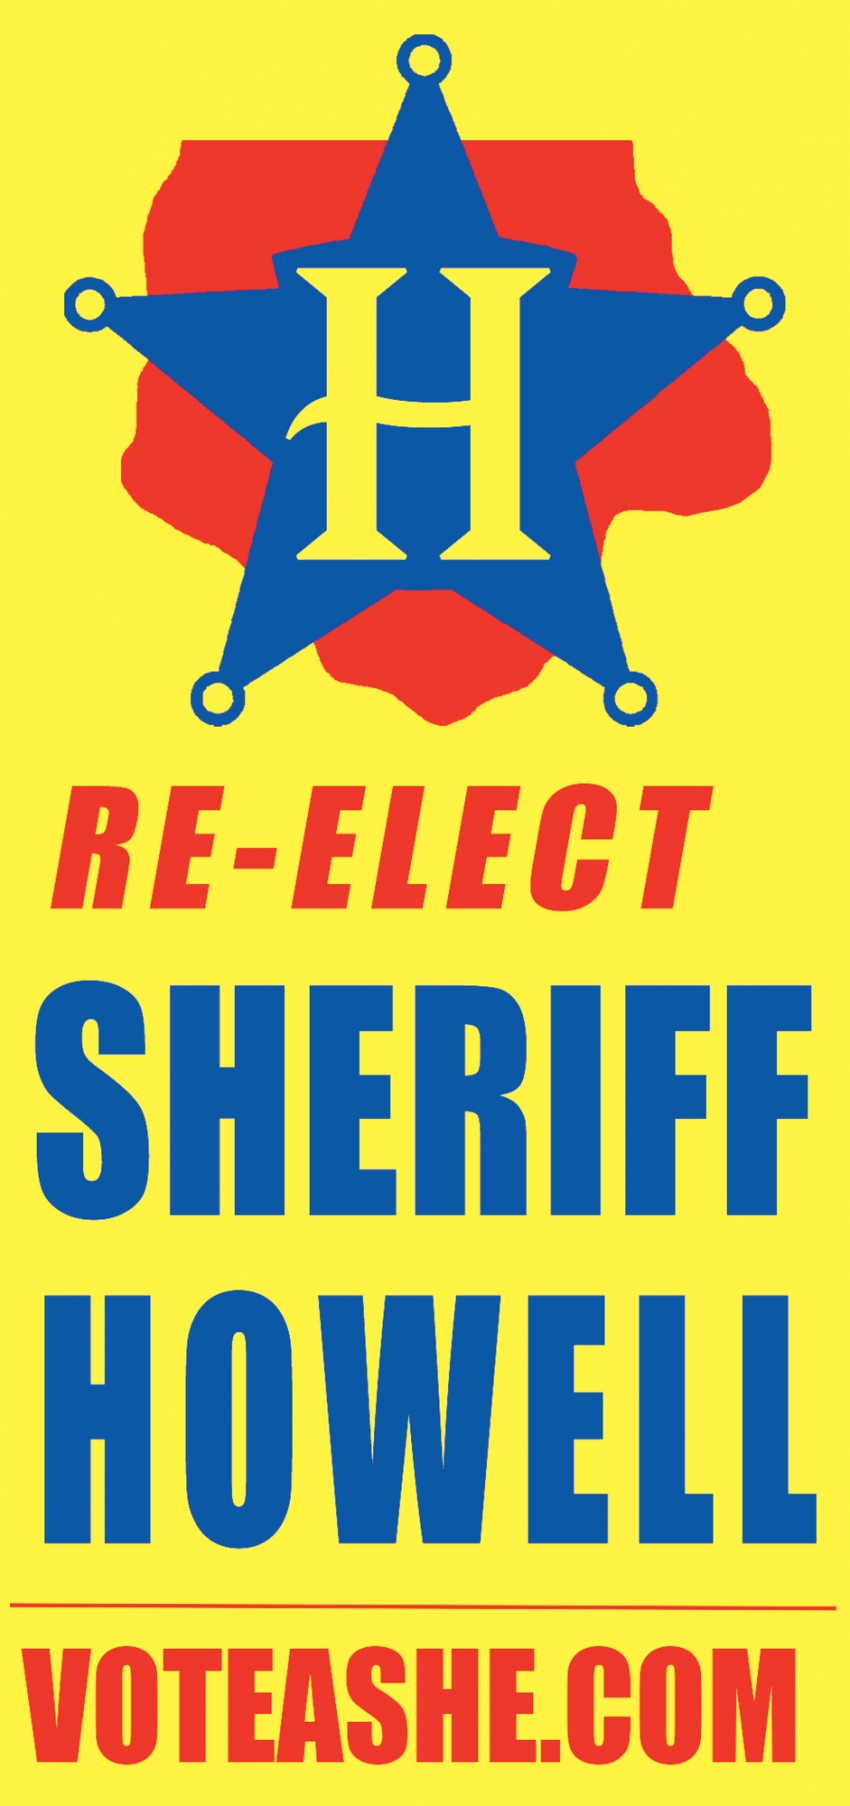 Reelect Sheriff Howell